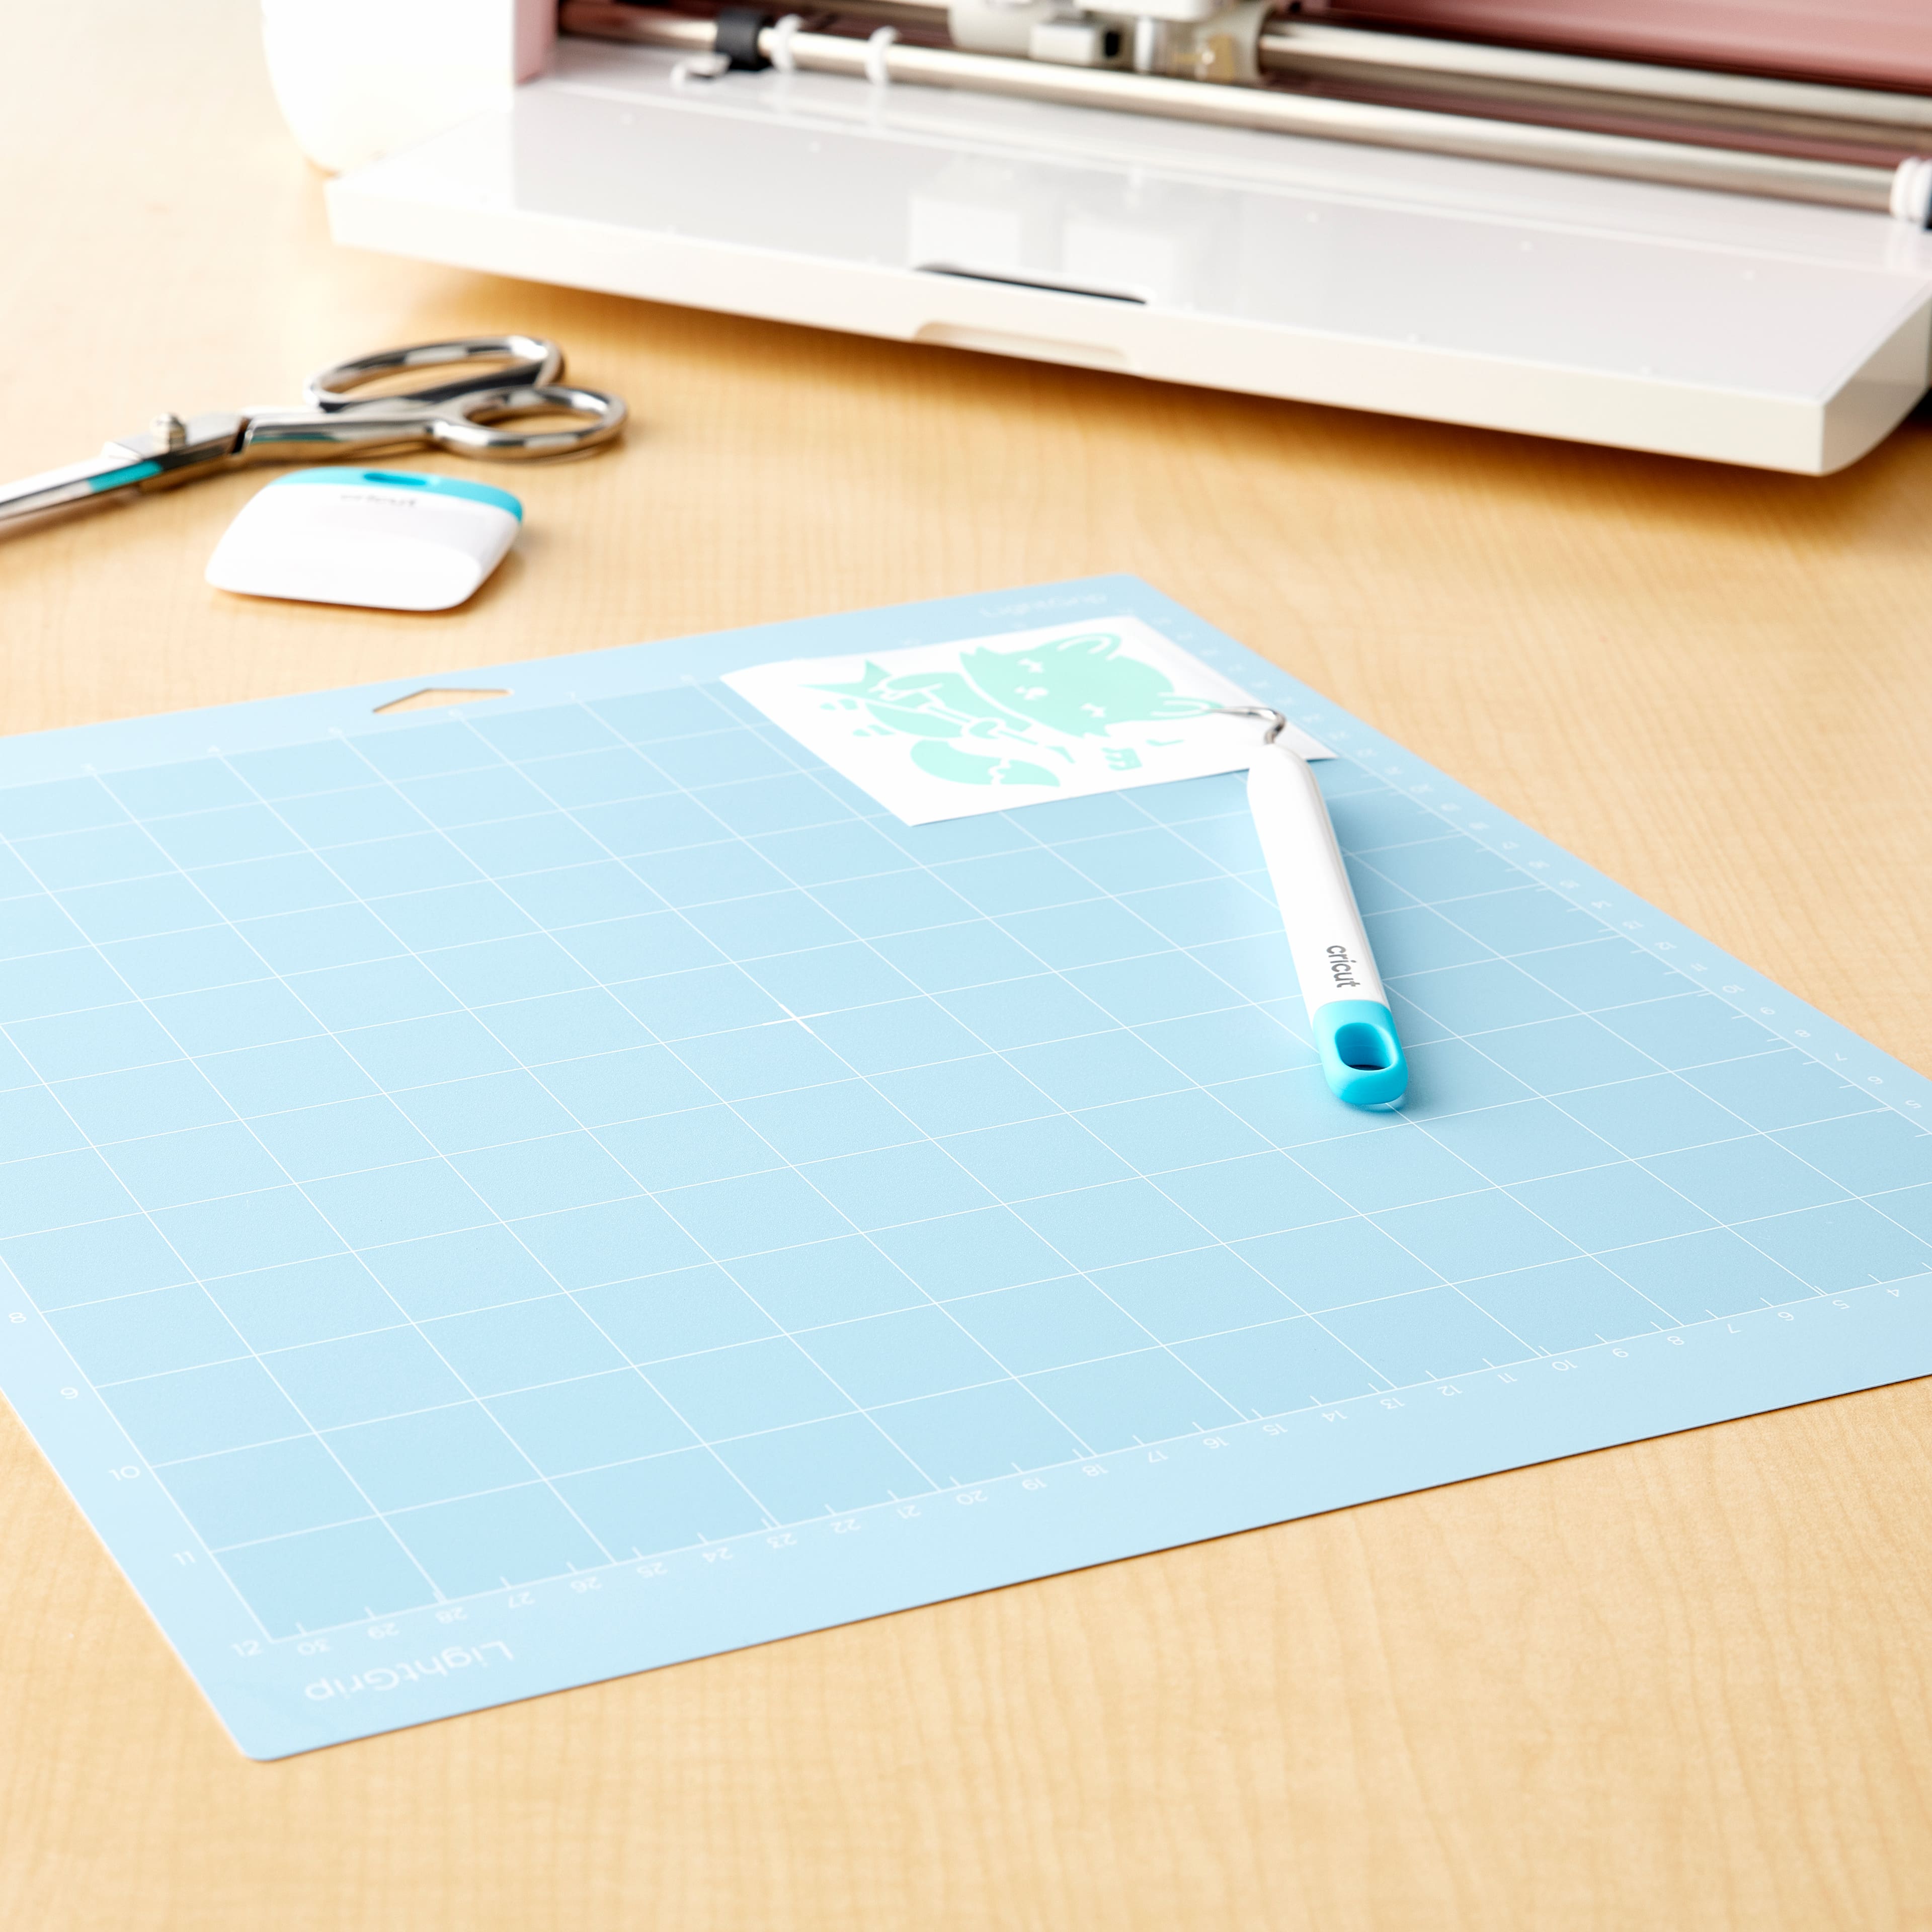  Cricut LightGrip Cutting Mats 12in x 24in, Reusable Cutting Mats  for Crafts with Protective Film, Use with Printer Paper, Vellum, Light  Cardstock & More for Cricut Explore & Maker (1 Count)